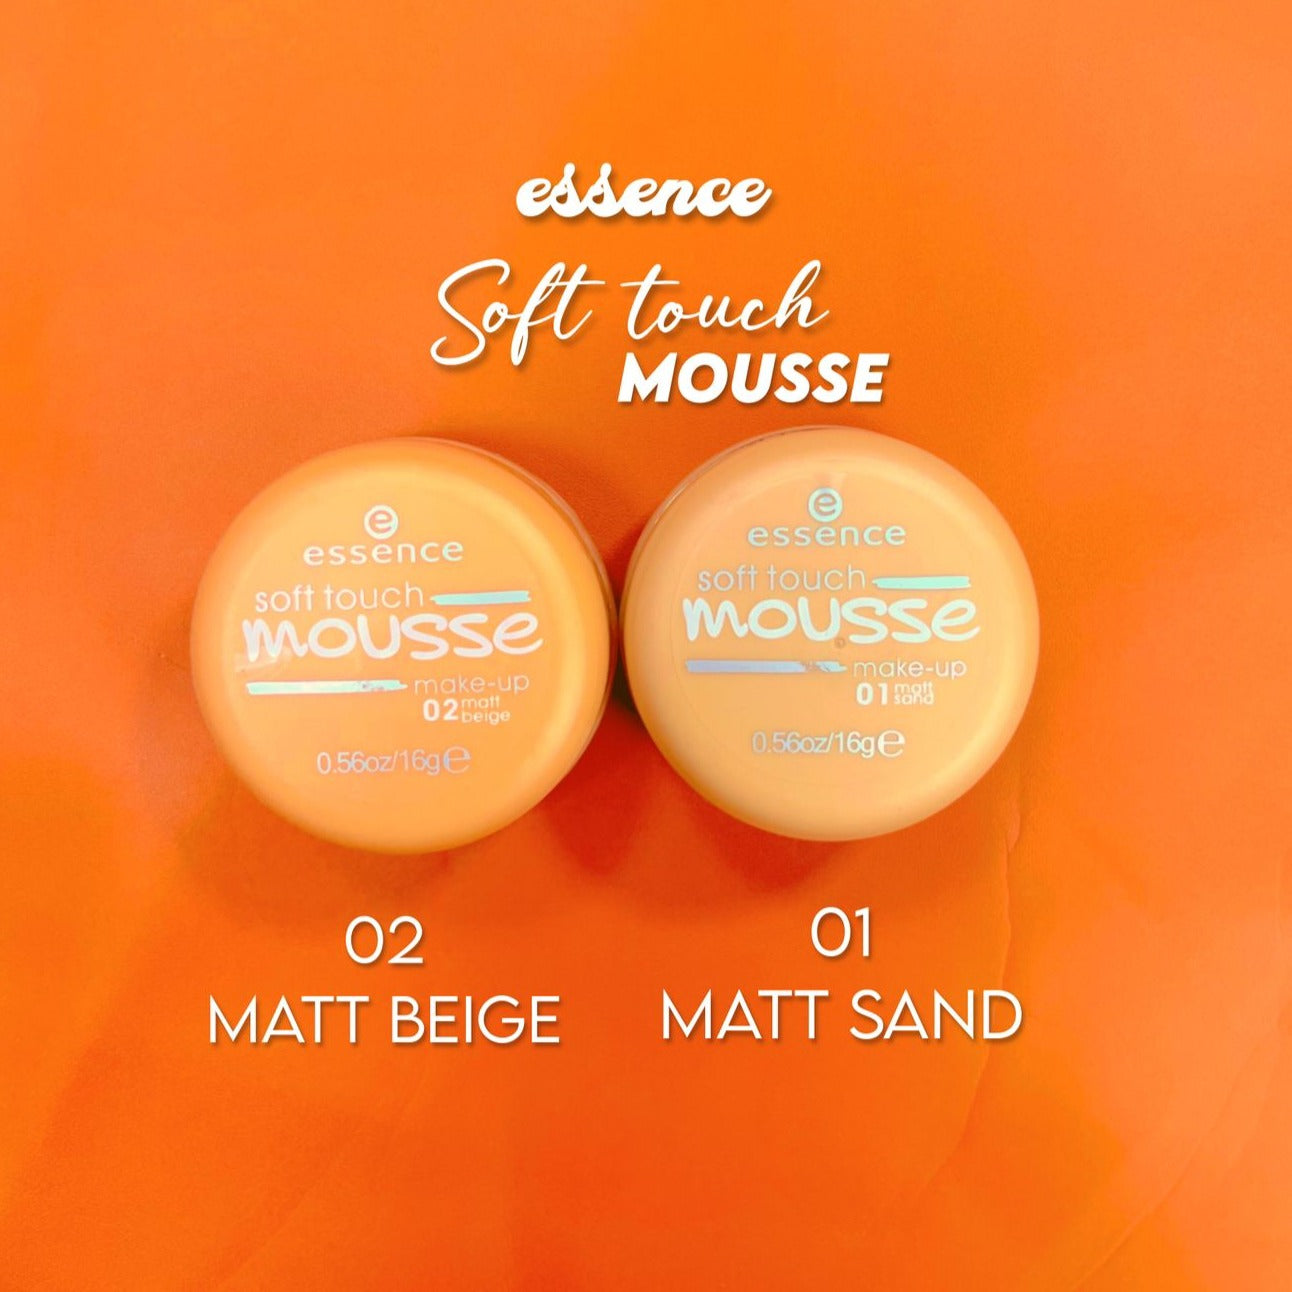 FOUNDATION ESSENSE SOFTTOUCH MOUSE MAKEUP